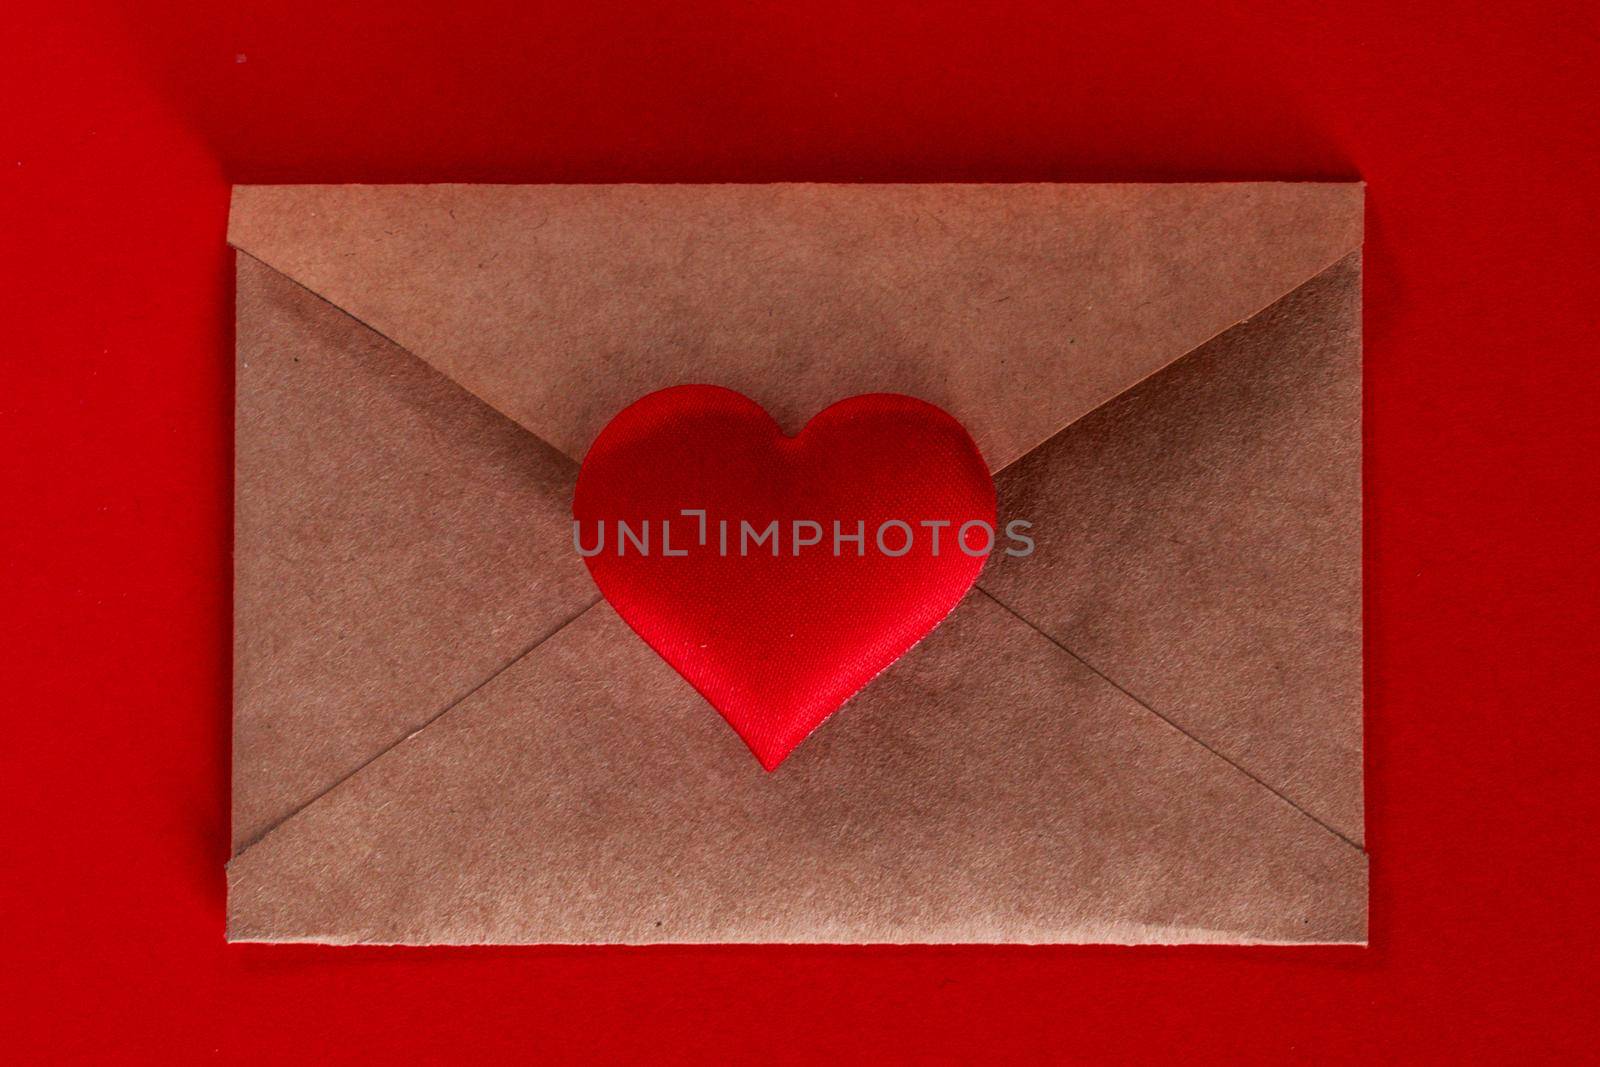 Valentine day love letter of brown paper envelope with red heart